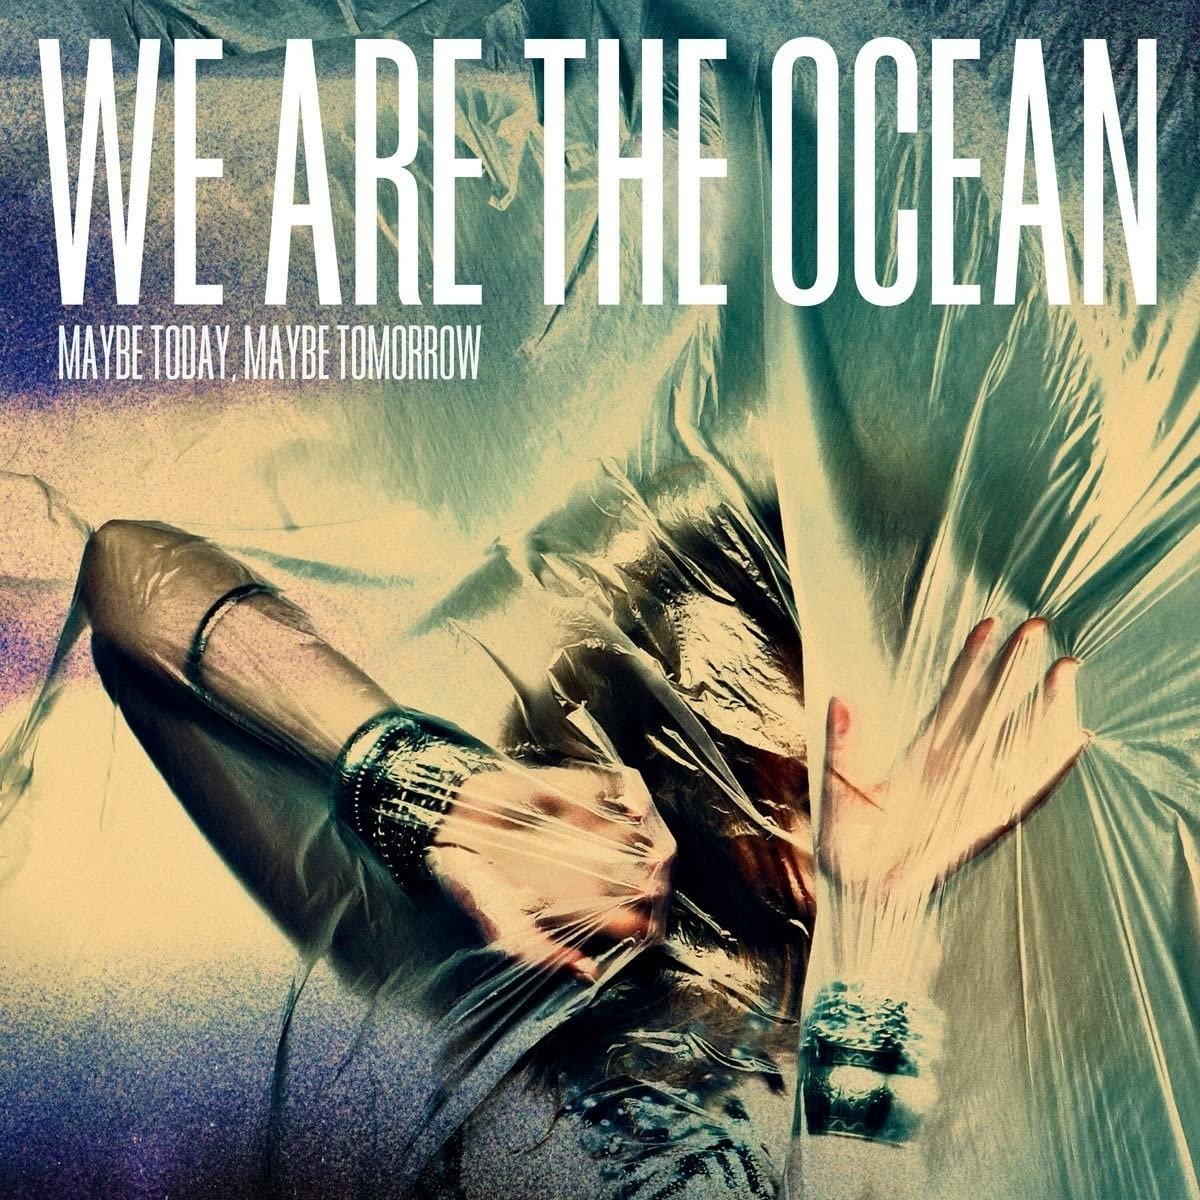 CD Shop - WE ARE THE OCEAN MAYBE TODAY, MAYBE TOMORROW